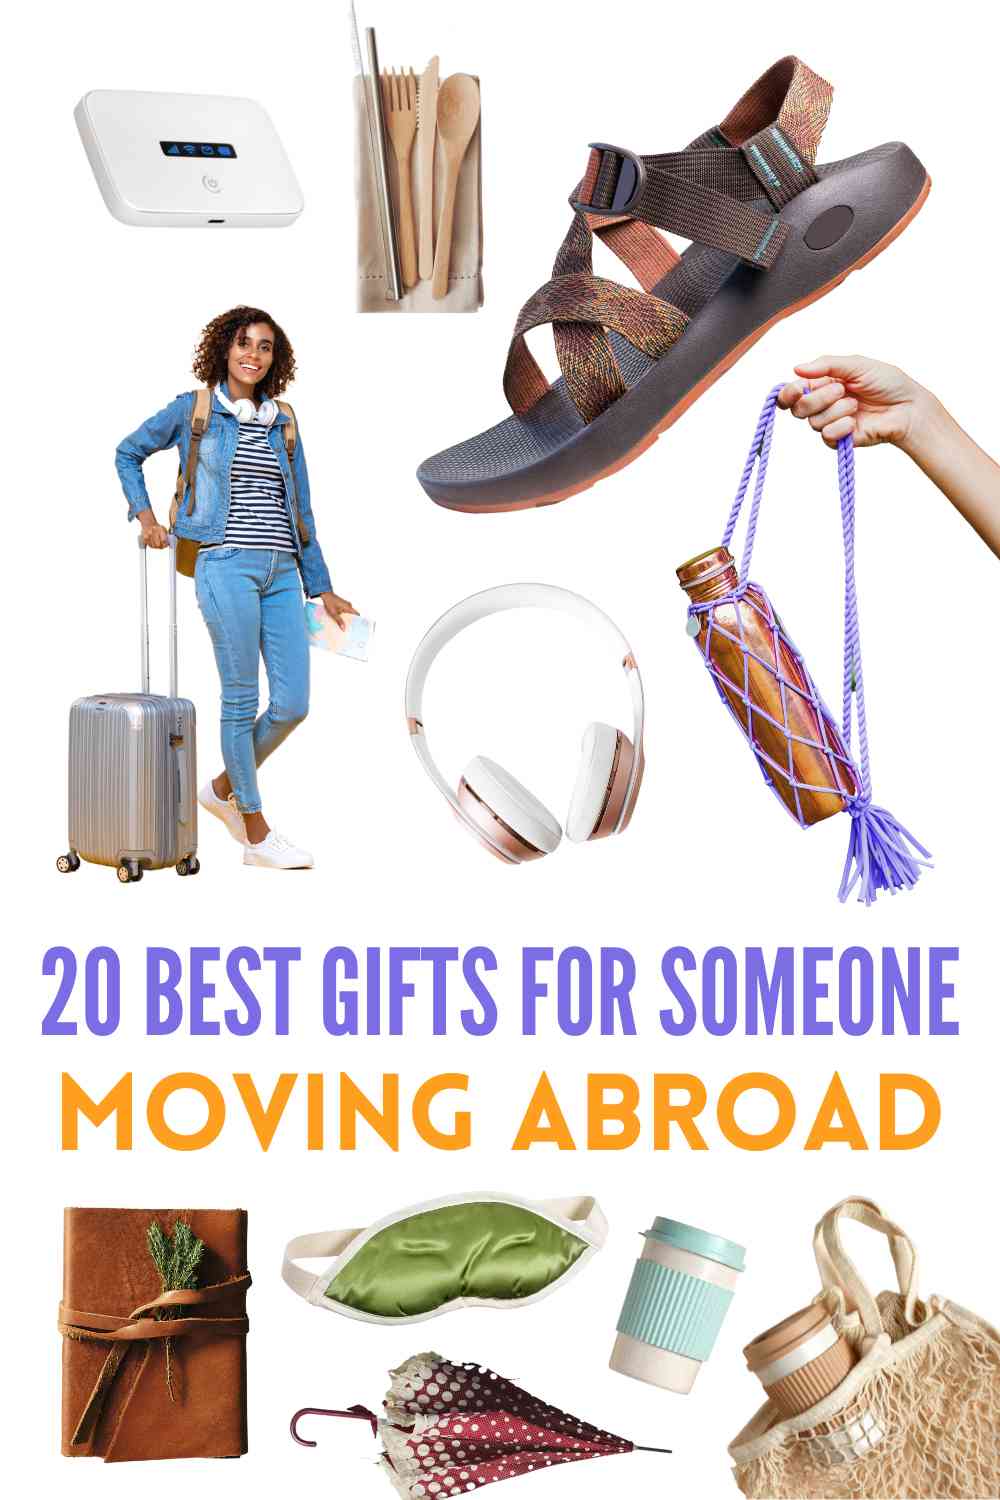 50 Gift Ideas For Someone Going Travelling - ItsAllBee | Solo Travel &  Adventure Tips